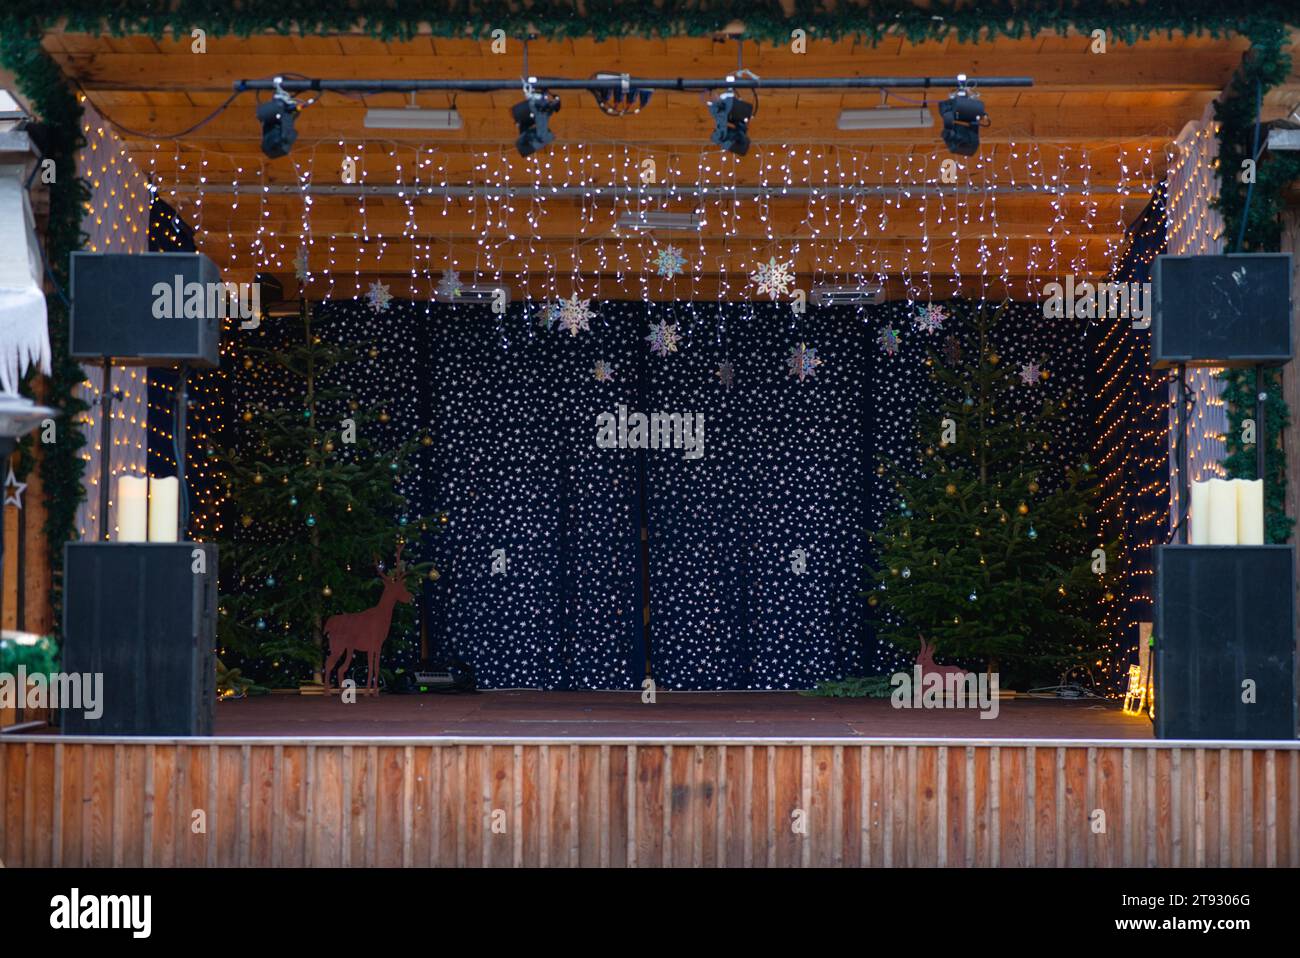 Step into a charming Christmas scene with a small stage adorned with a sound system. The focal point is the stage backdrop, featuring blue fabric with Stock Photo